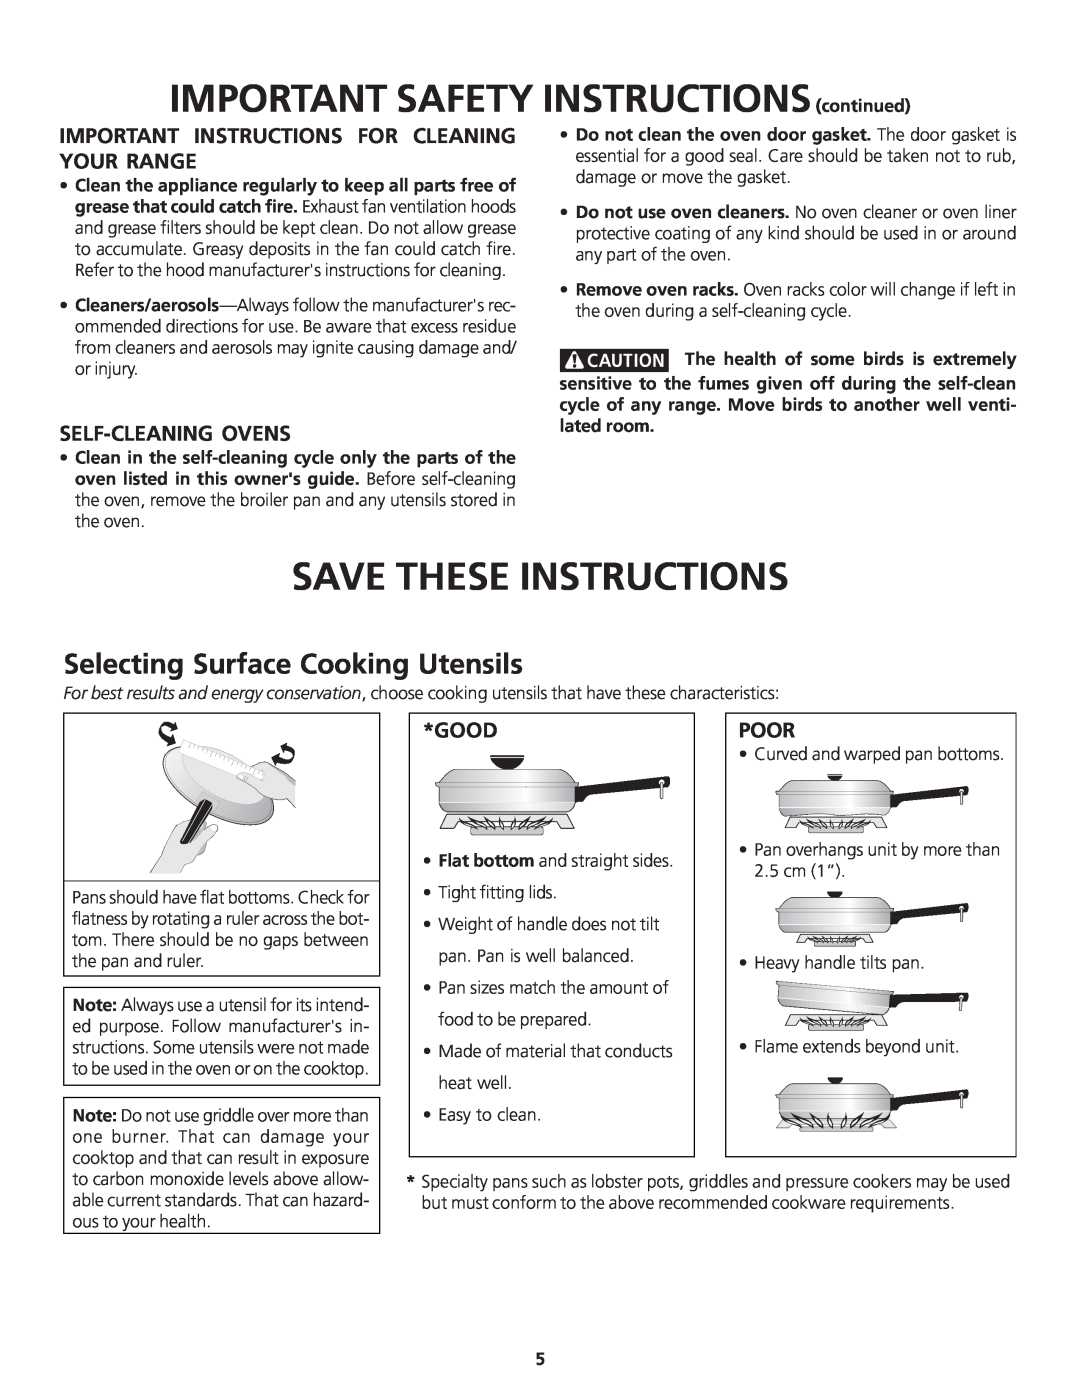 Frigidaire 318200869 Save These Instructions, Selecting Surface Cooking Utensils, Your Range, Self-Cleaning Ovens, Good 